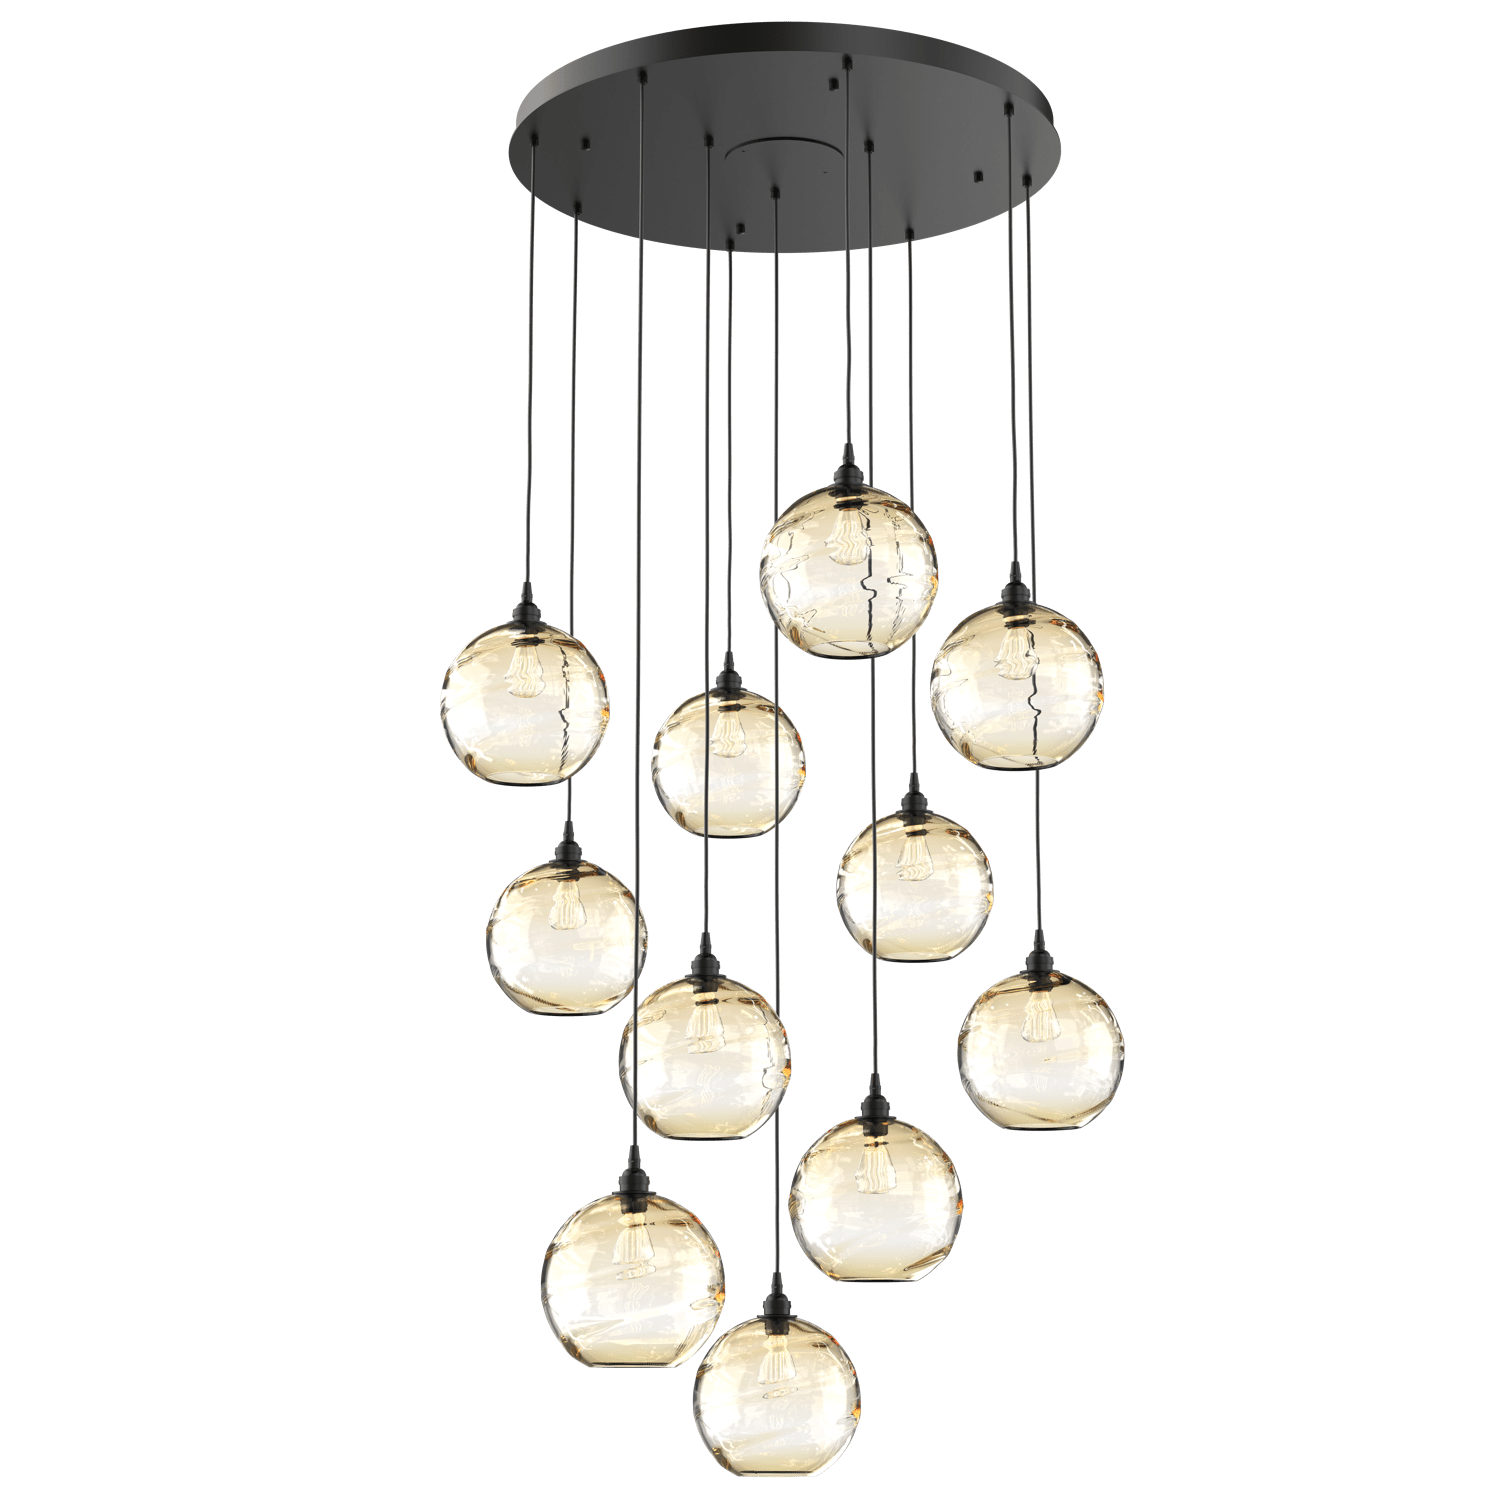 CHB0047-11-MB-OA-Hammerton-Studio-Optic-Blown-Glass-Terra-11-light-round-pendant-chandelier-with-matte-black-finish-and-optic-amber-blown-glass-shades-and-incandescent-lamping